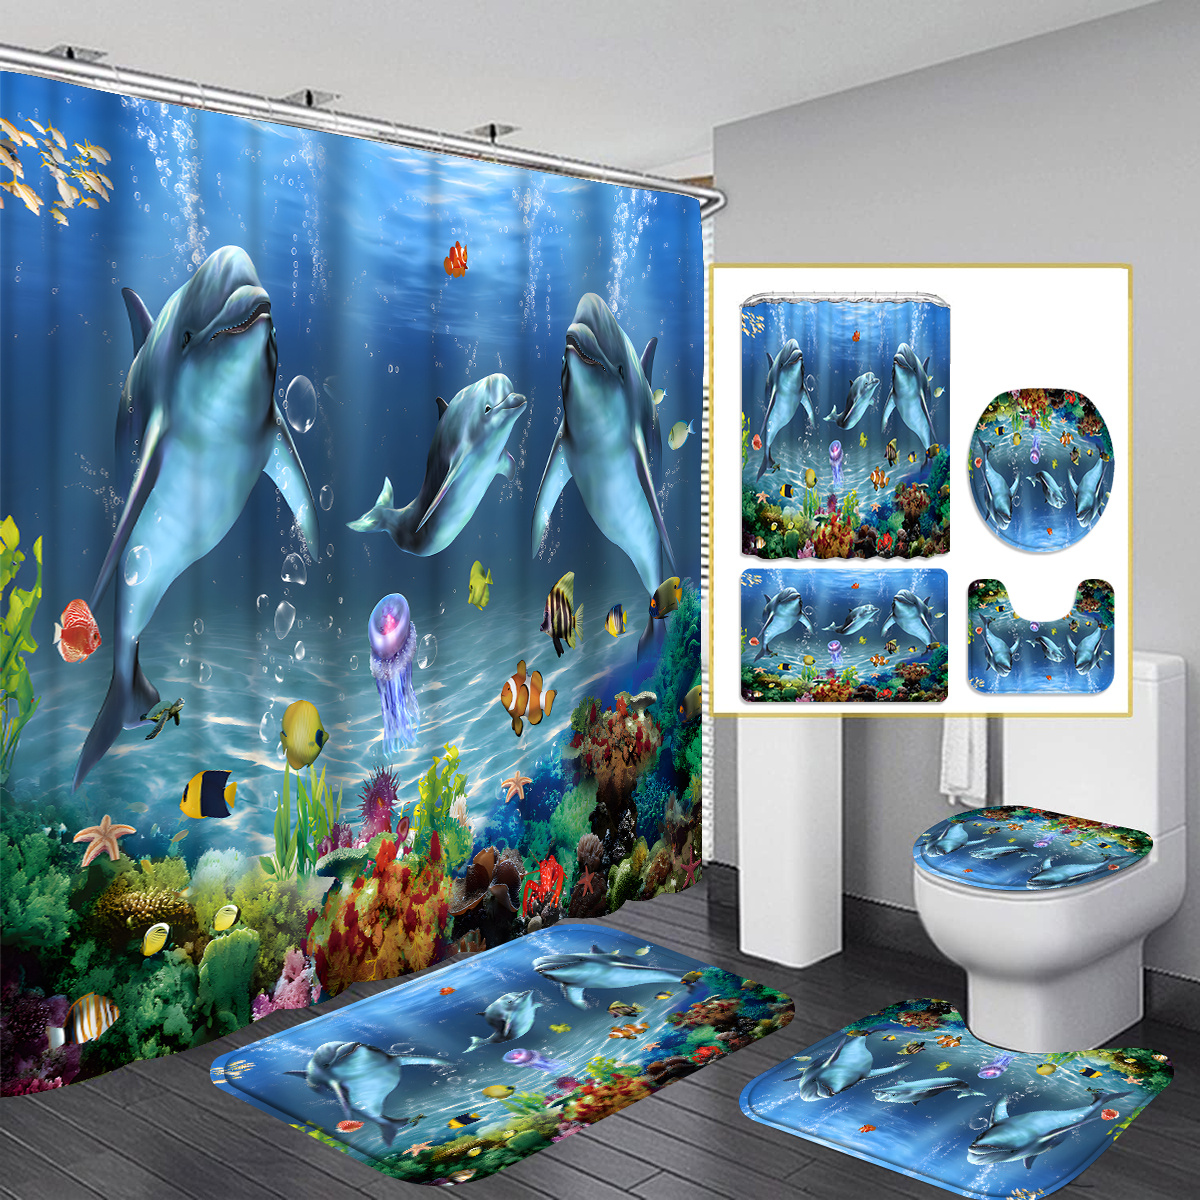 

4pcs Underwater World Of And Fish Shower Curtain Gift Modern Home Bathroom Decoration Curtain And Toilet Floor Mat 3-piece Set With 12 Shower Curtain Hooks